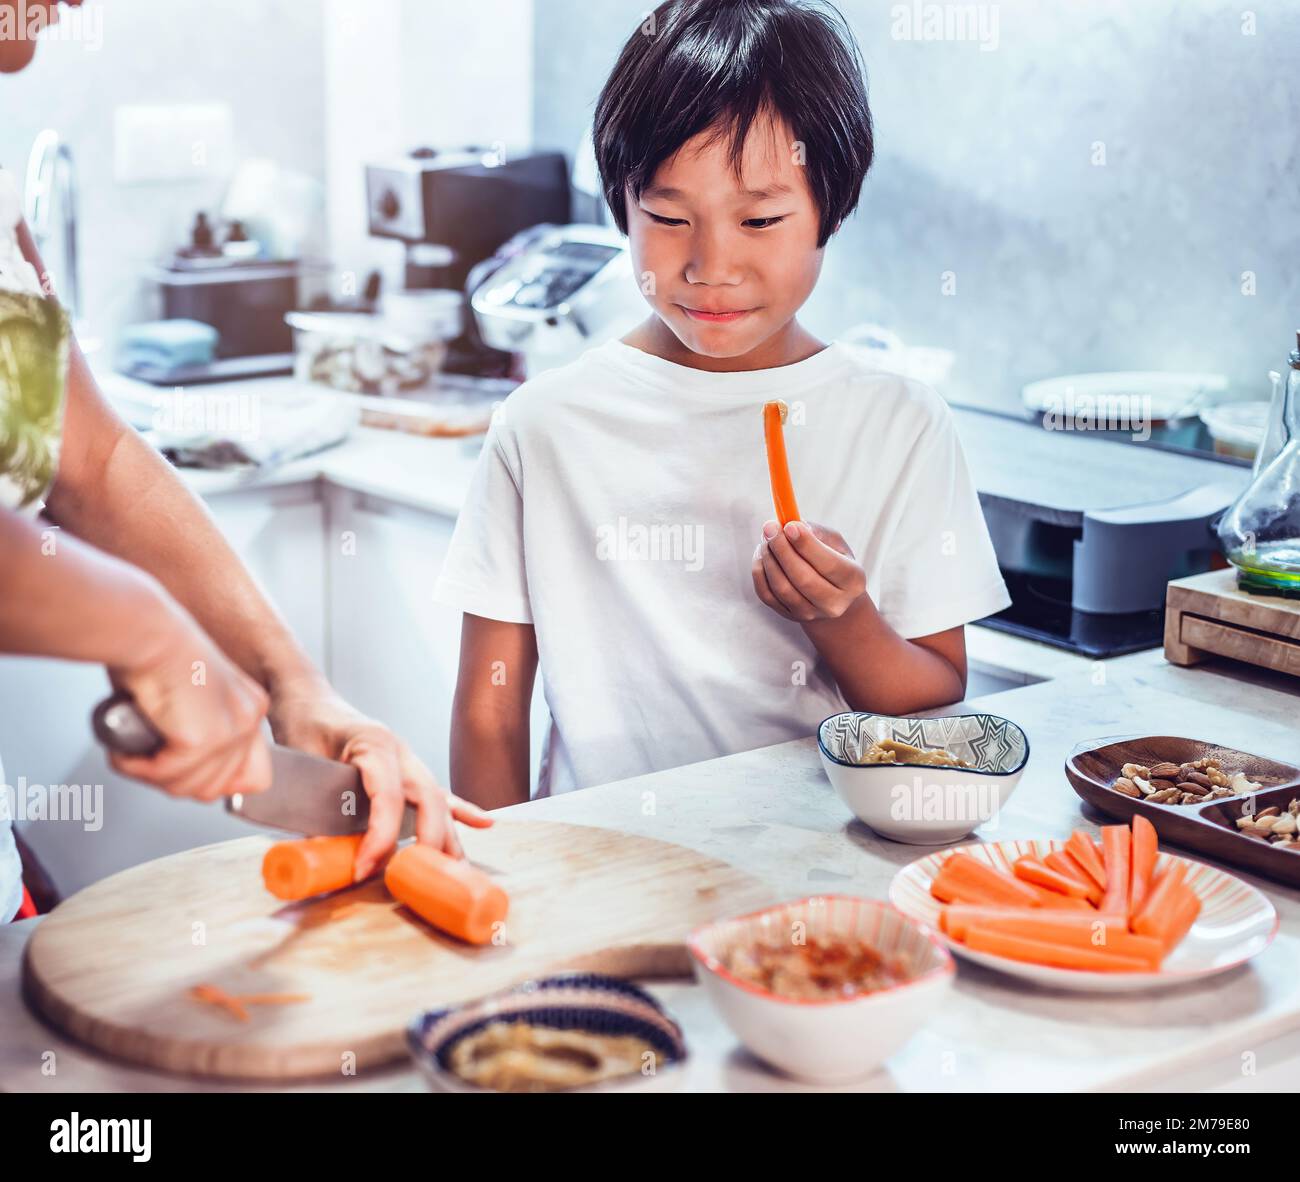 an asian boy cooking with his mother, tasting a carrot. healthy, organic and natural food with the family. Stock Photo